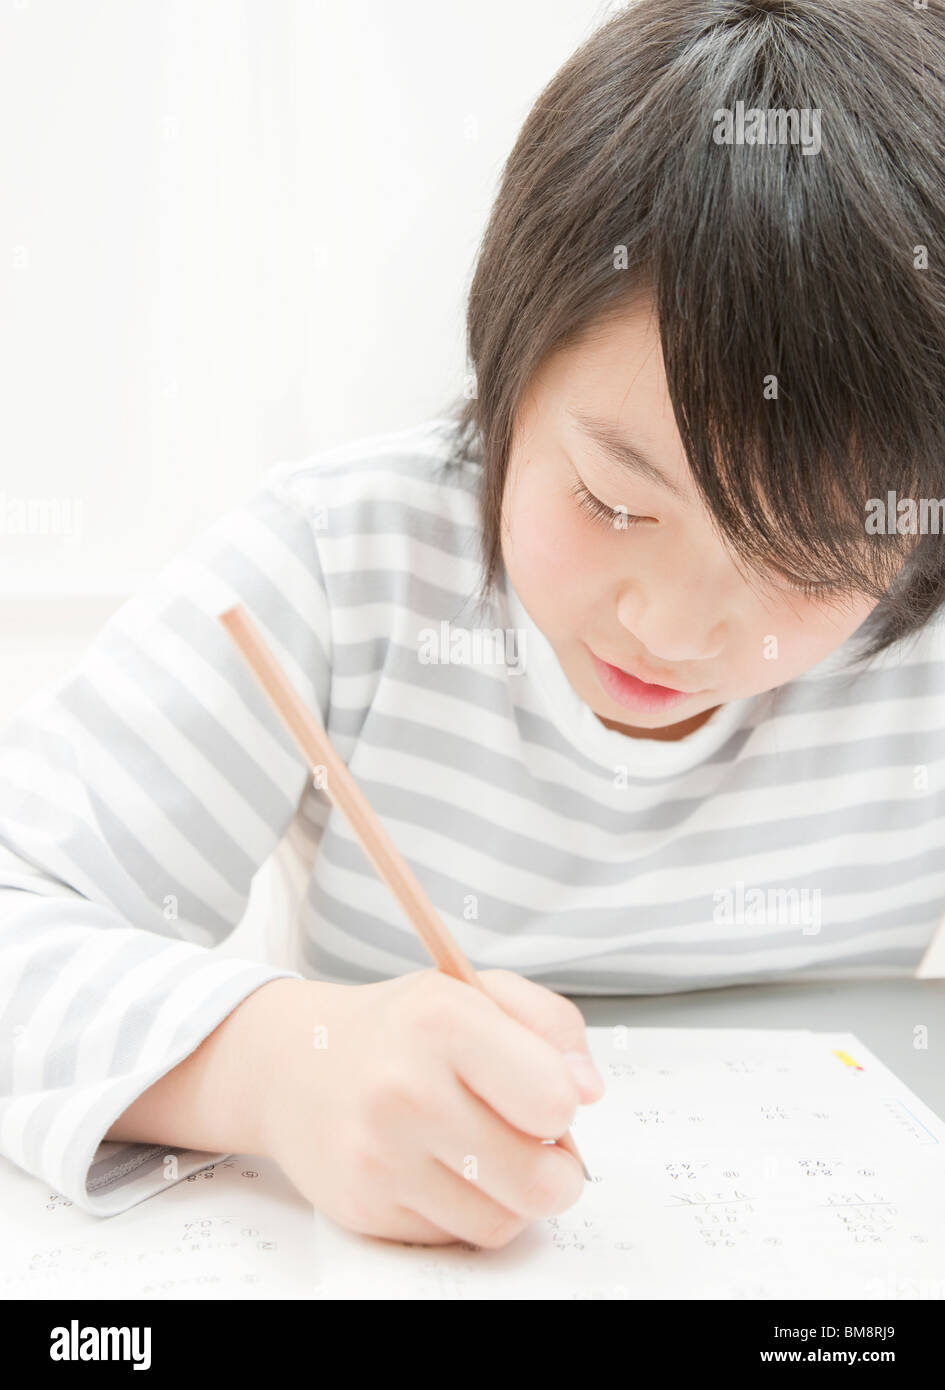 A Boy Studying at Desk Stock Photo